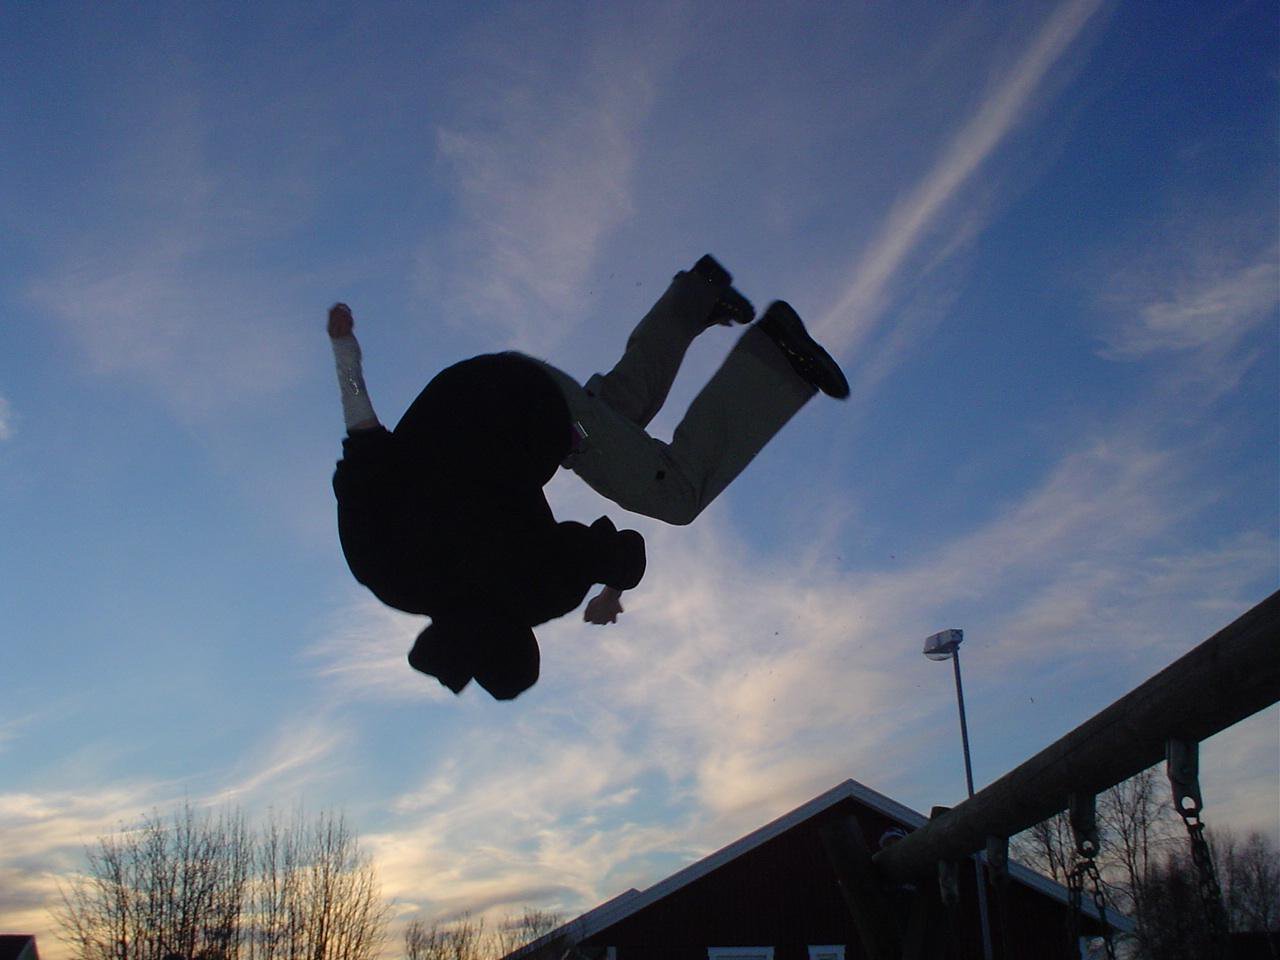 me doing a under flip.. with my broken thumb